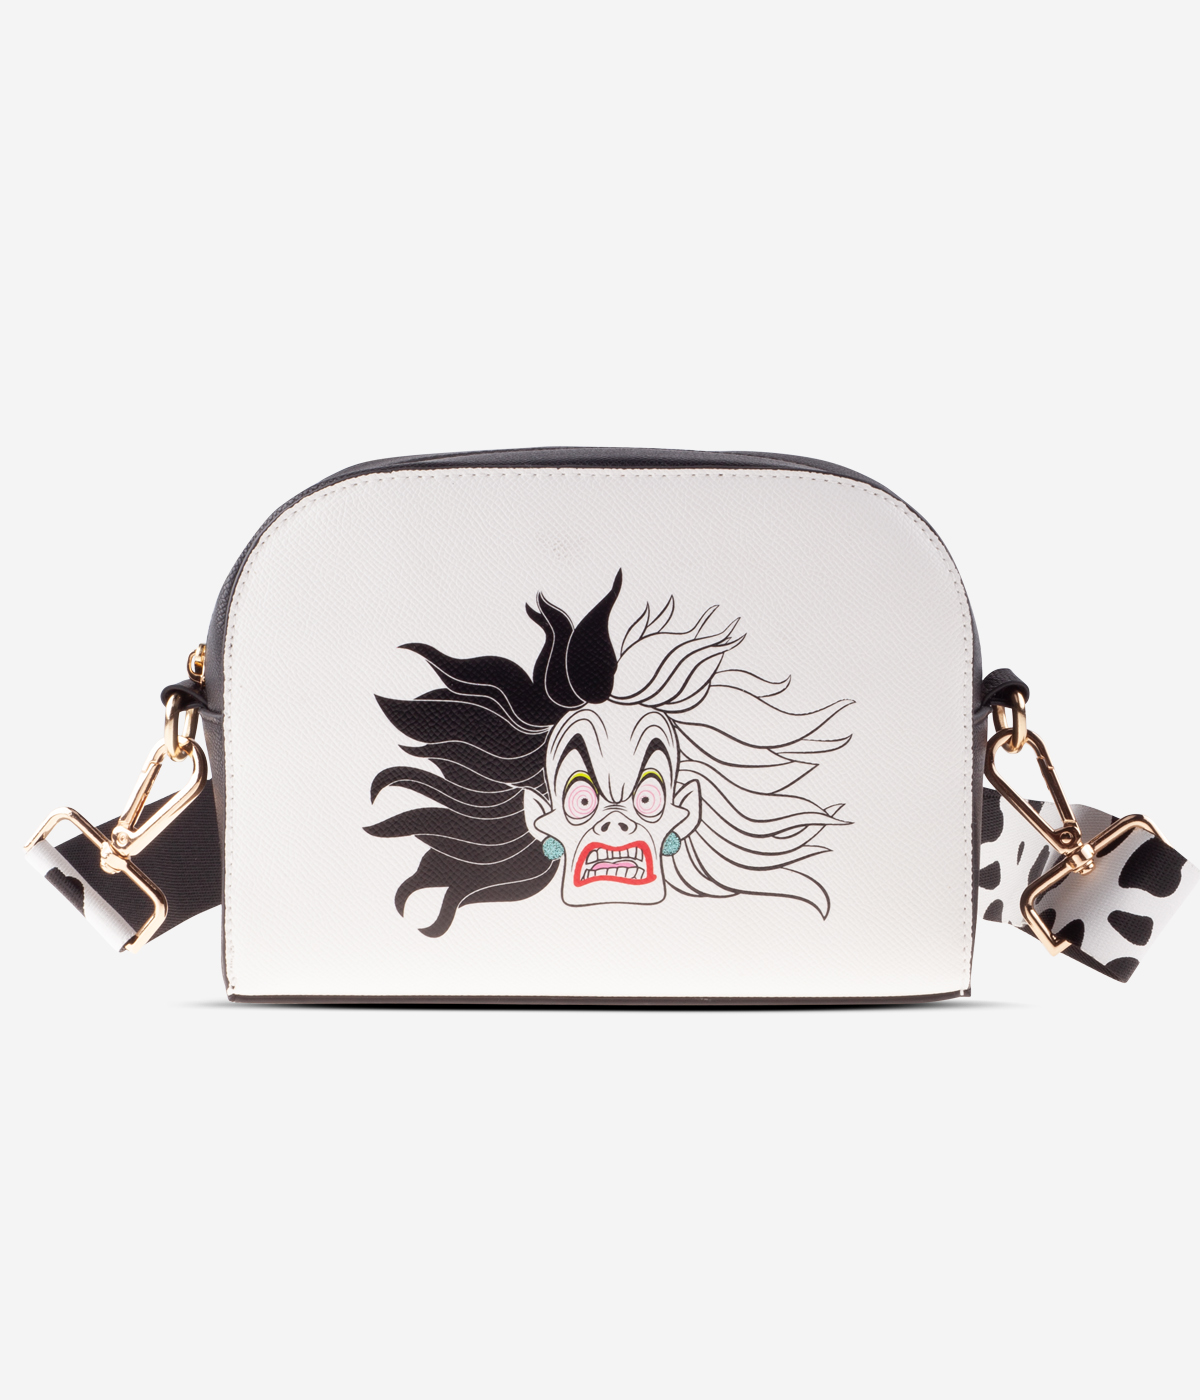 DisneyBags_Products_07